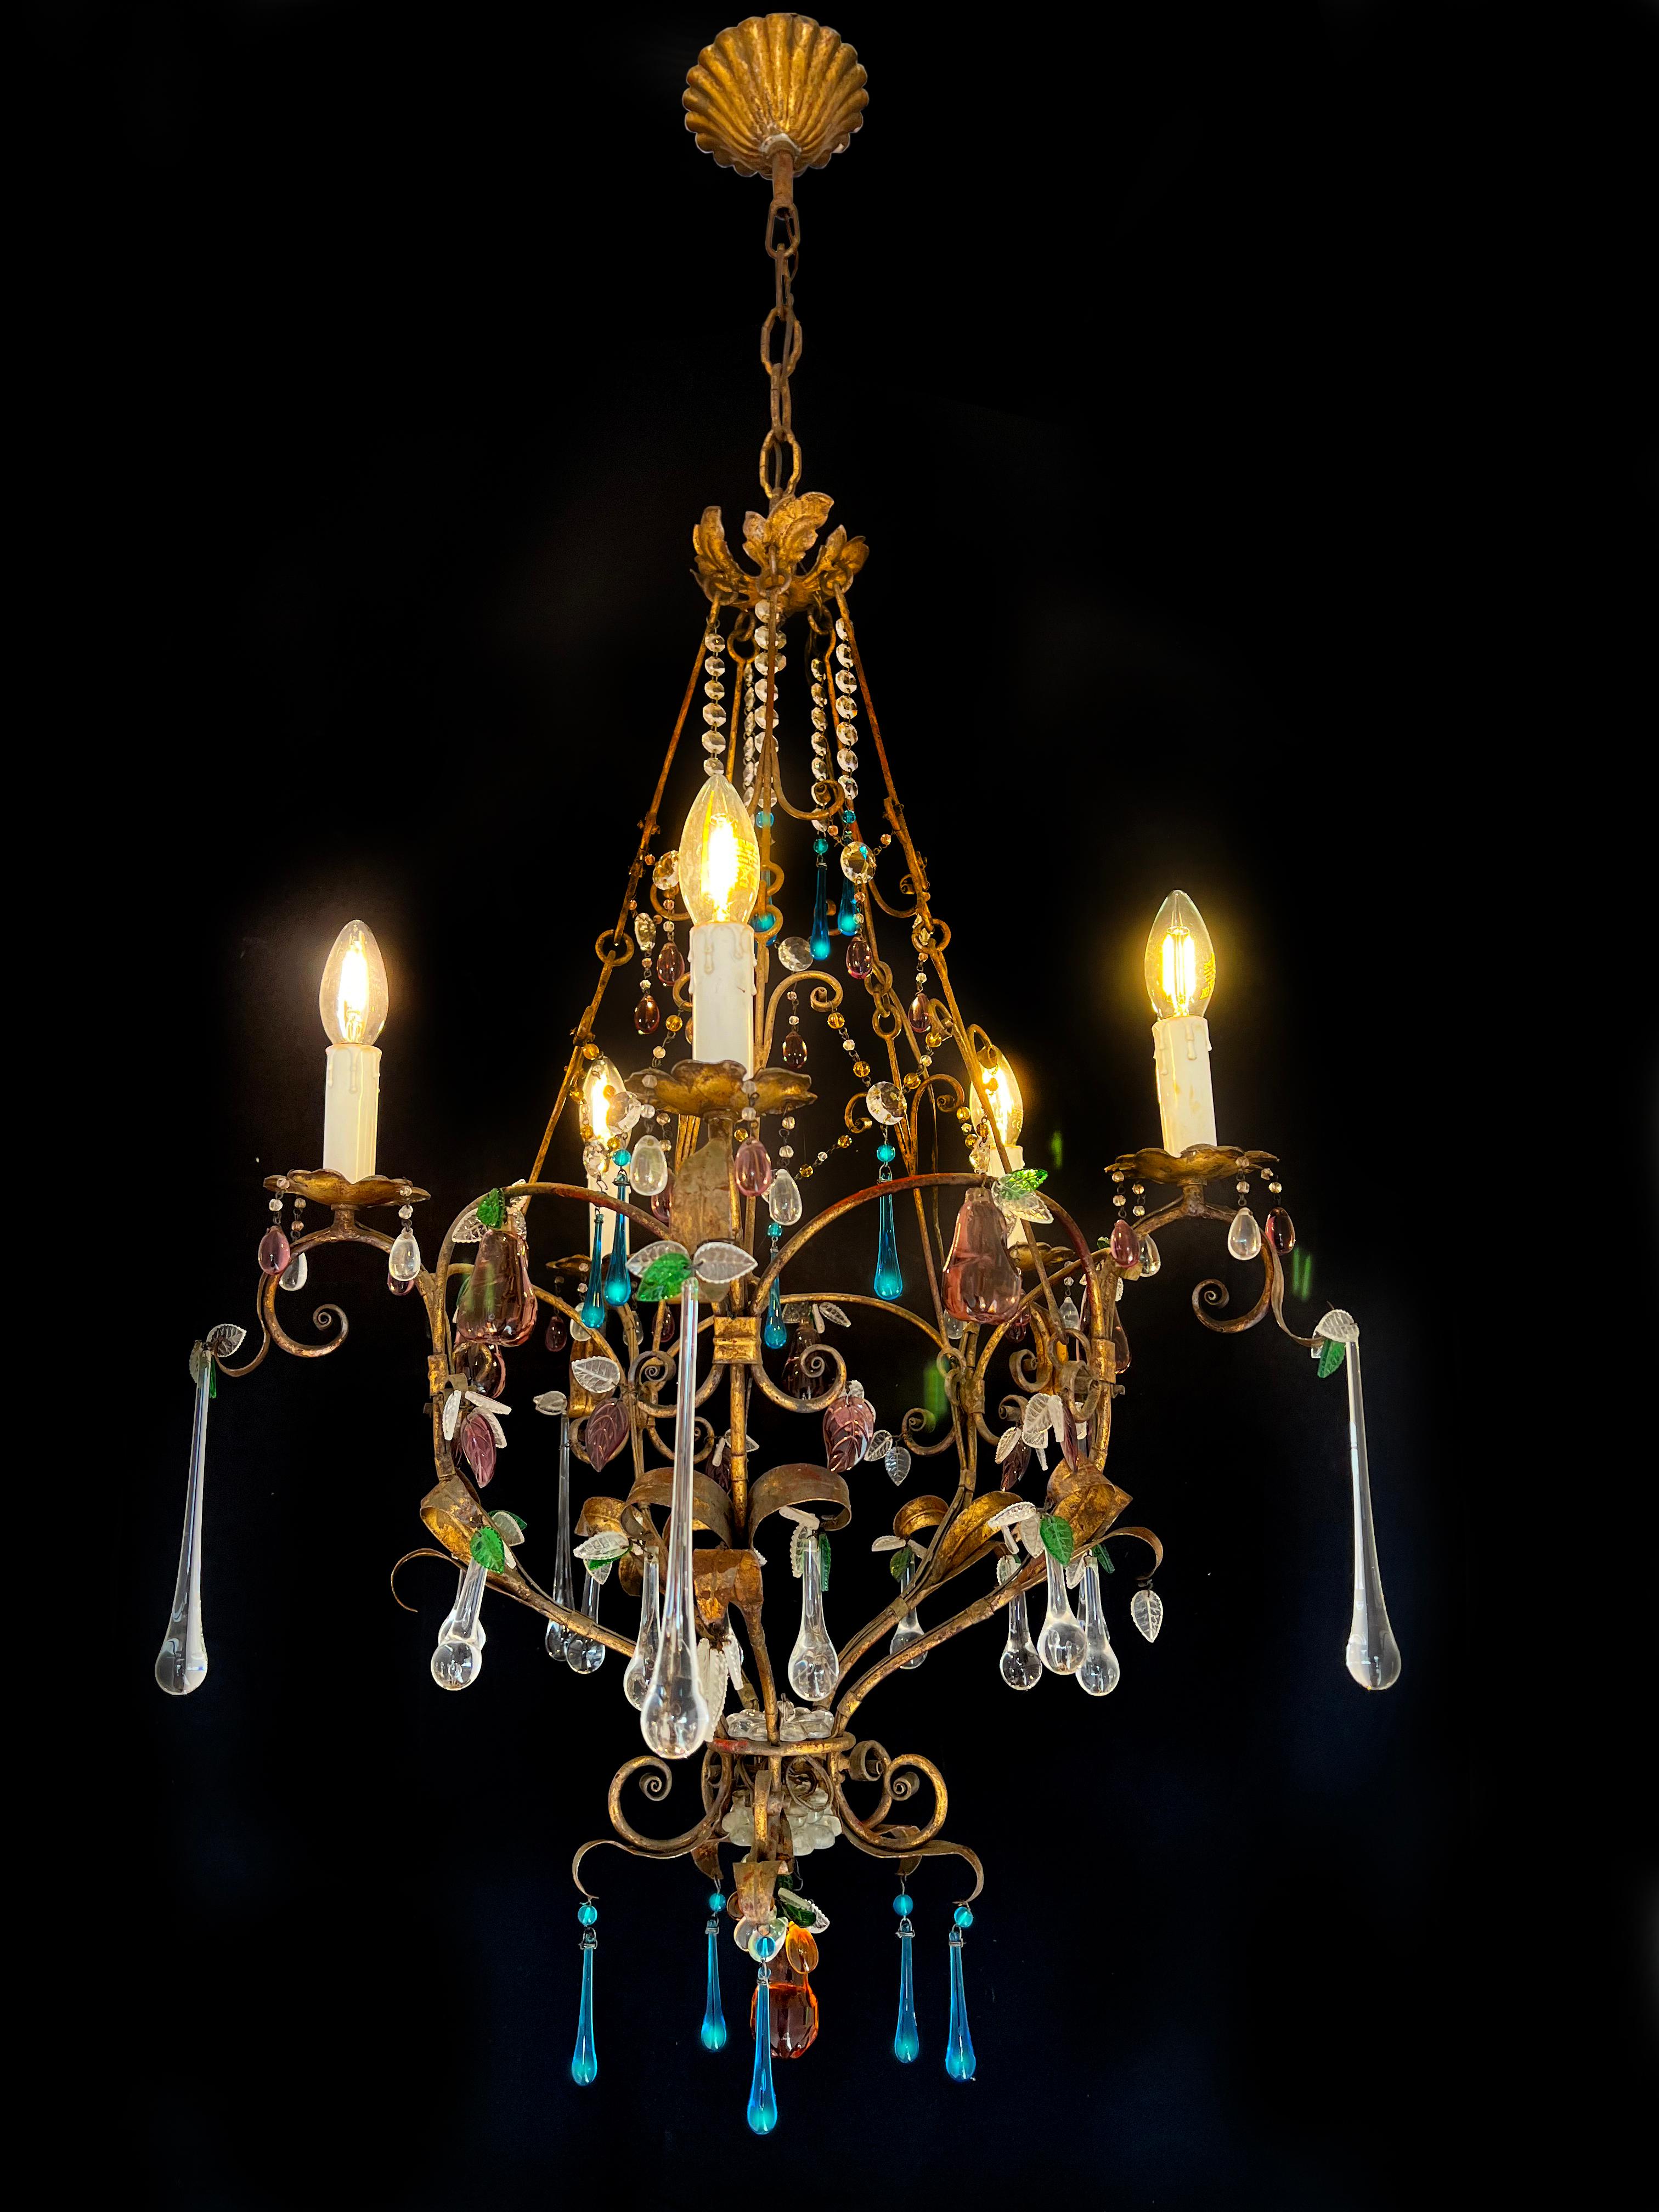 Fascinating Murano chandelier inspired by the divine Betty Davis.
Height 120 cm, diameter 55 cm, height without chain 100 cm. Five light E14